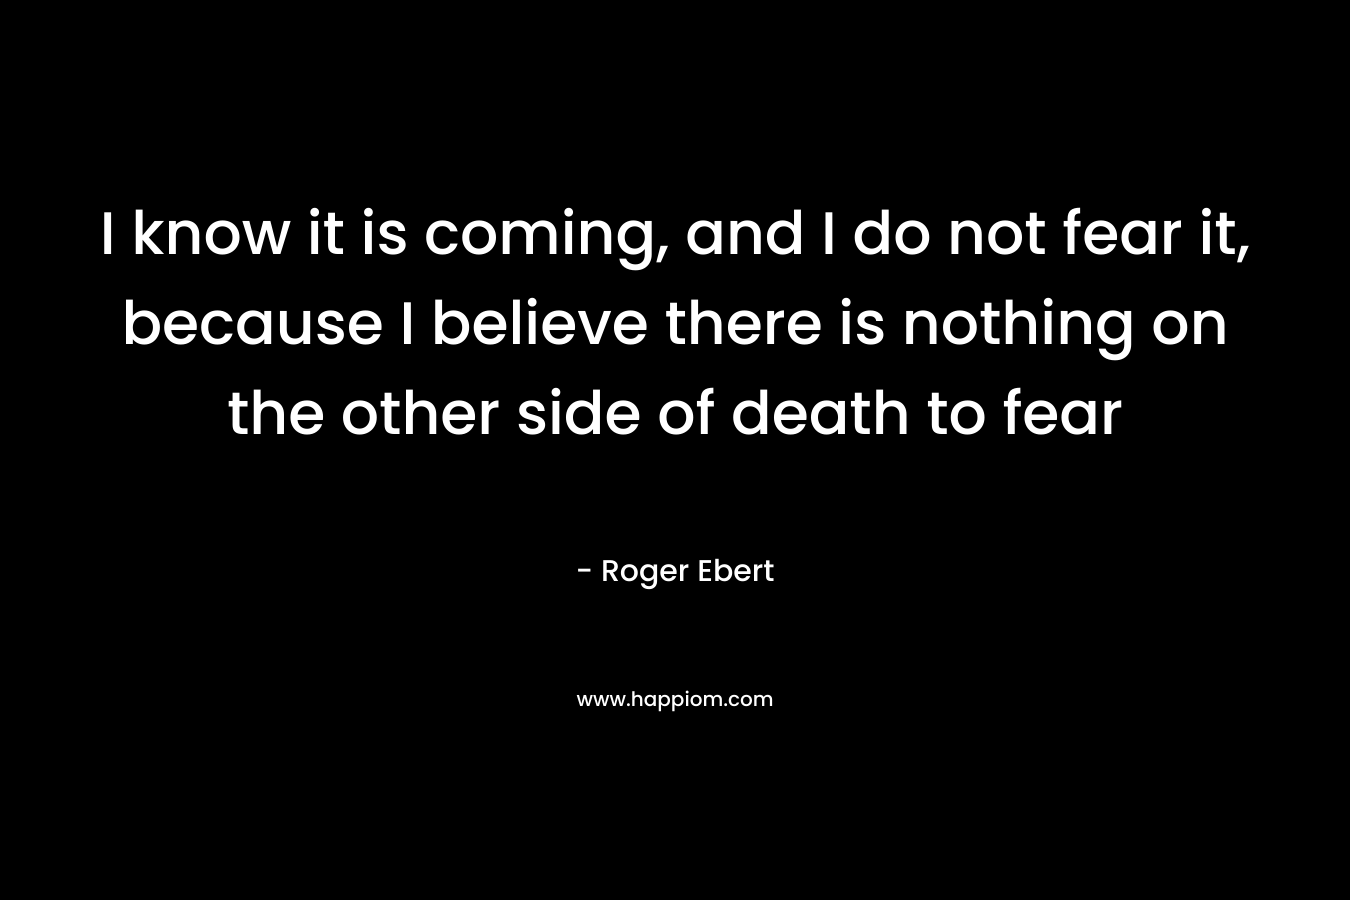 I know it is coming, and I do not fear it, because I believe there is nothing on the other side of death to fear